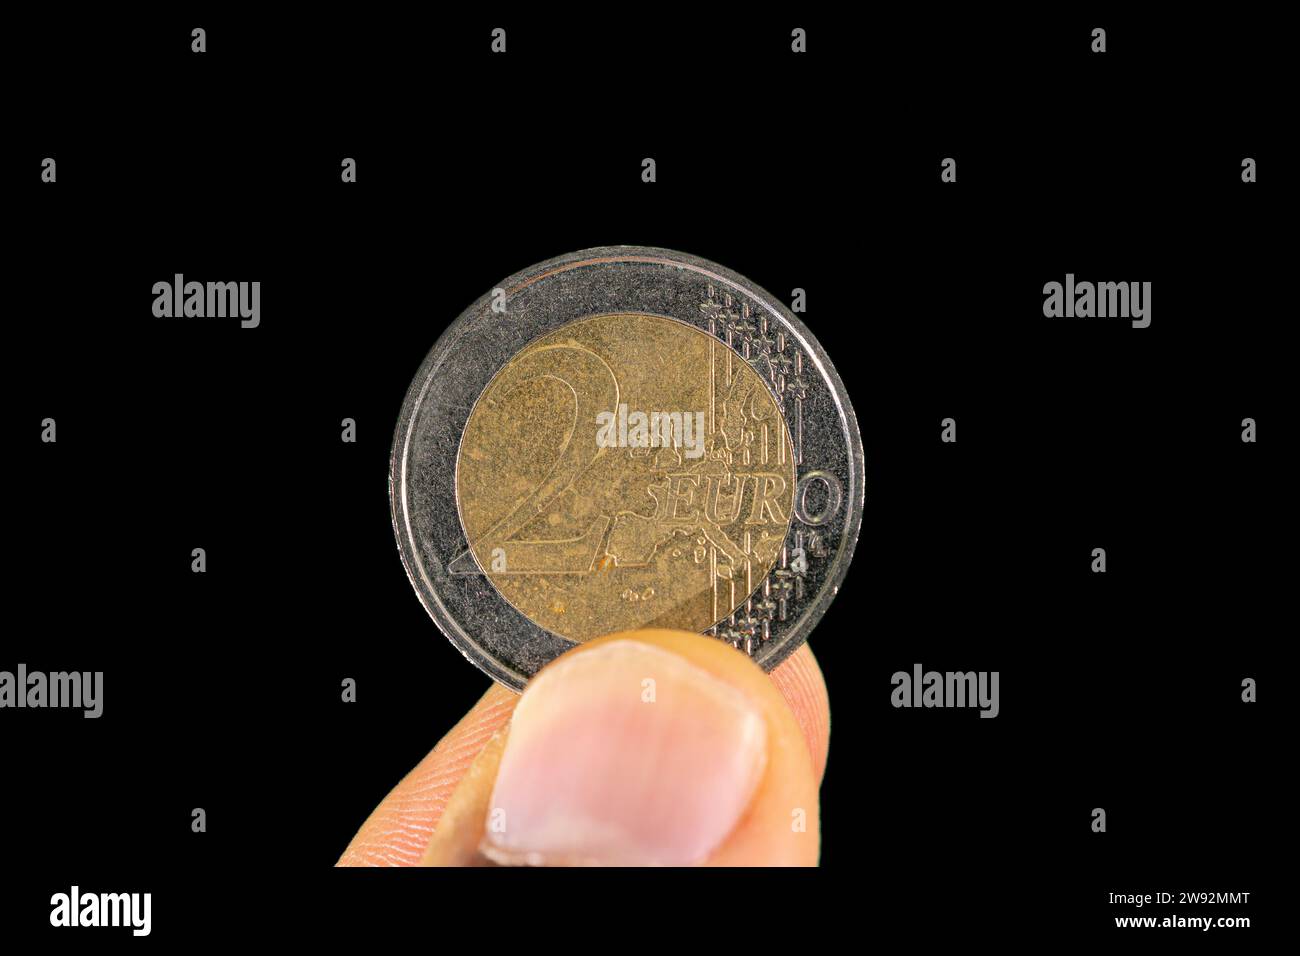 2 euro coin face held between thumb and index finger Stock Photo